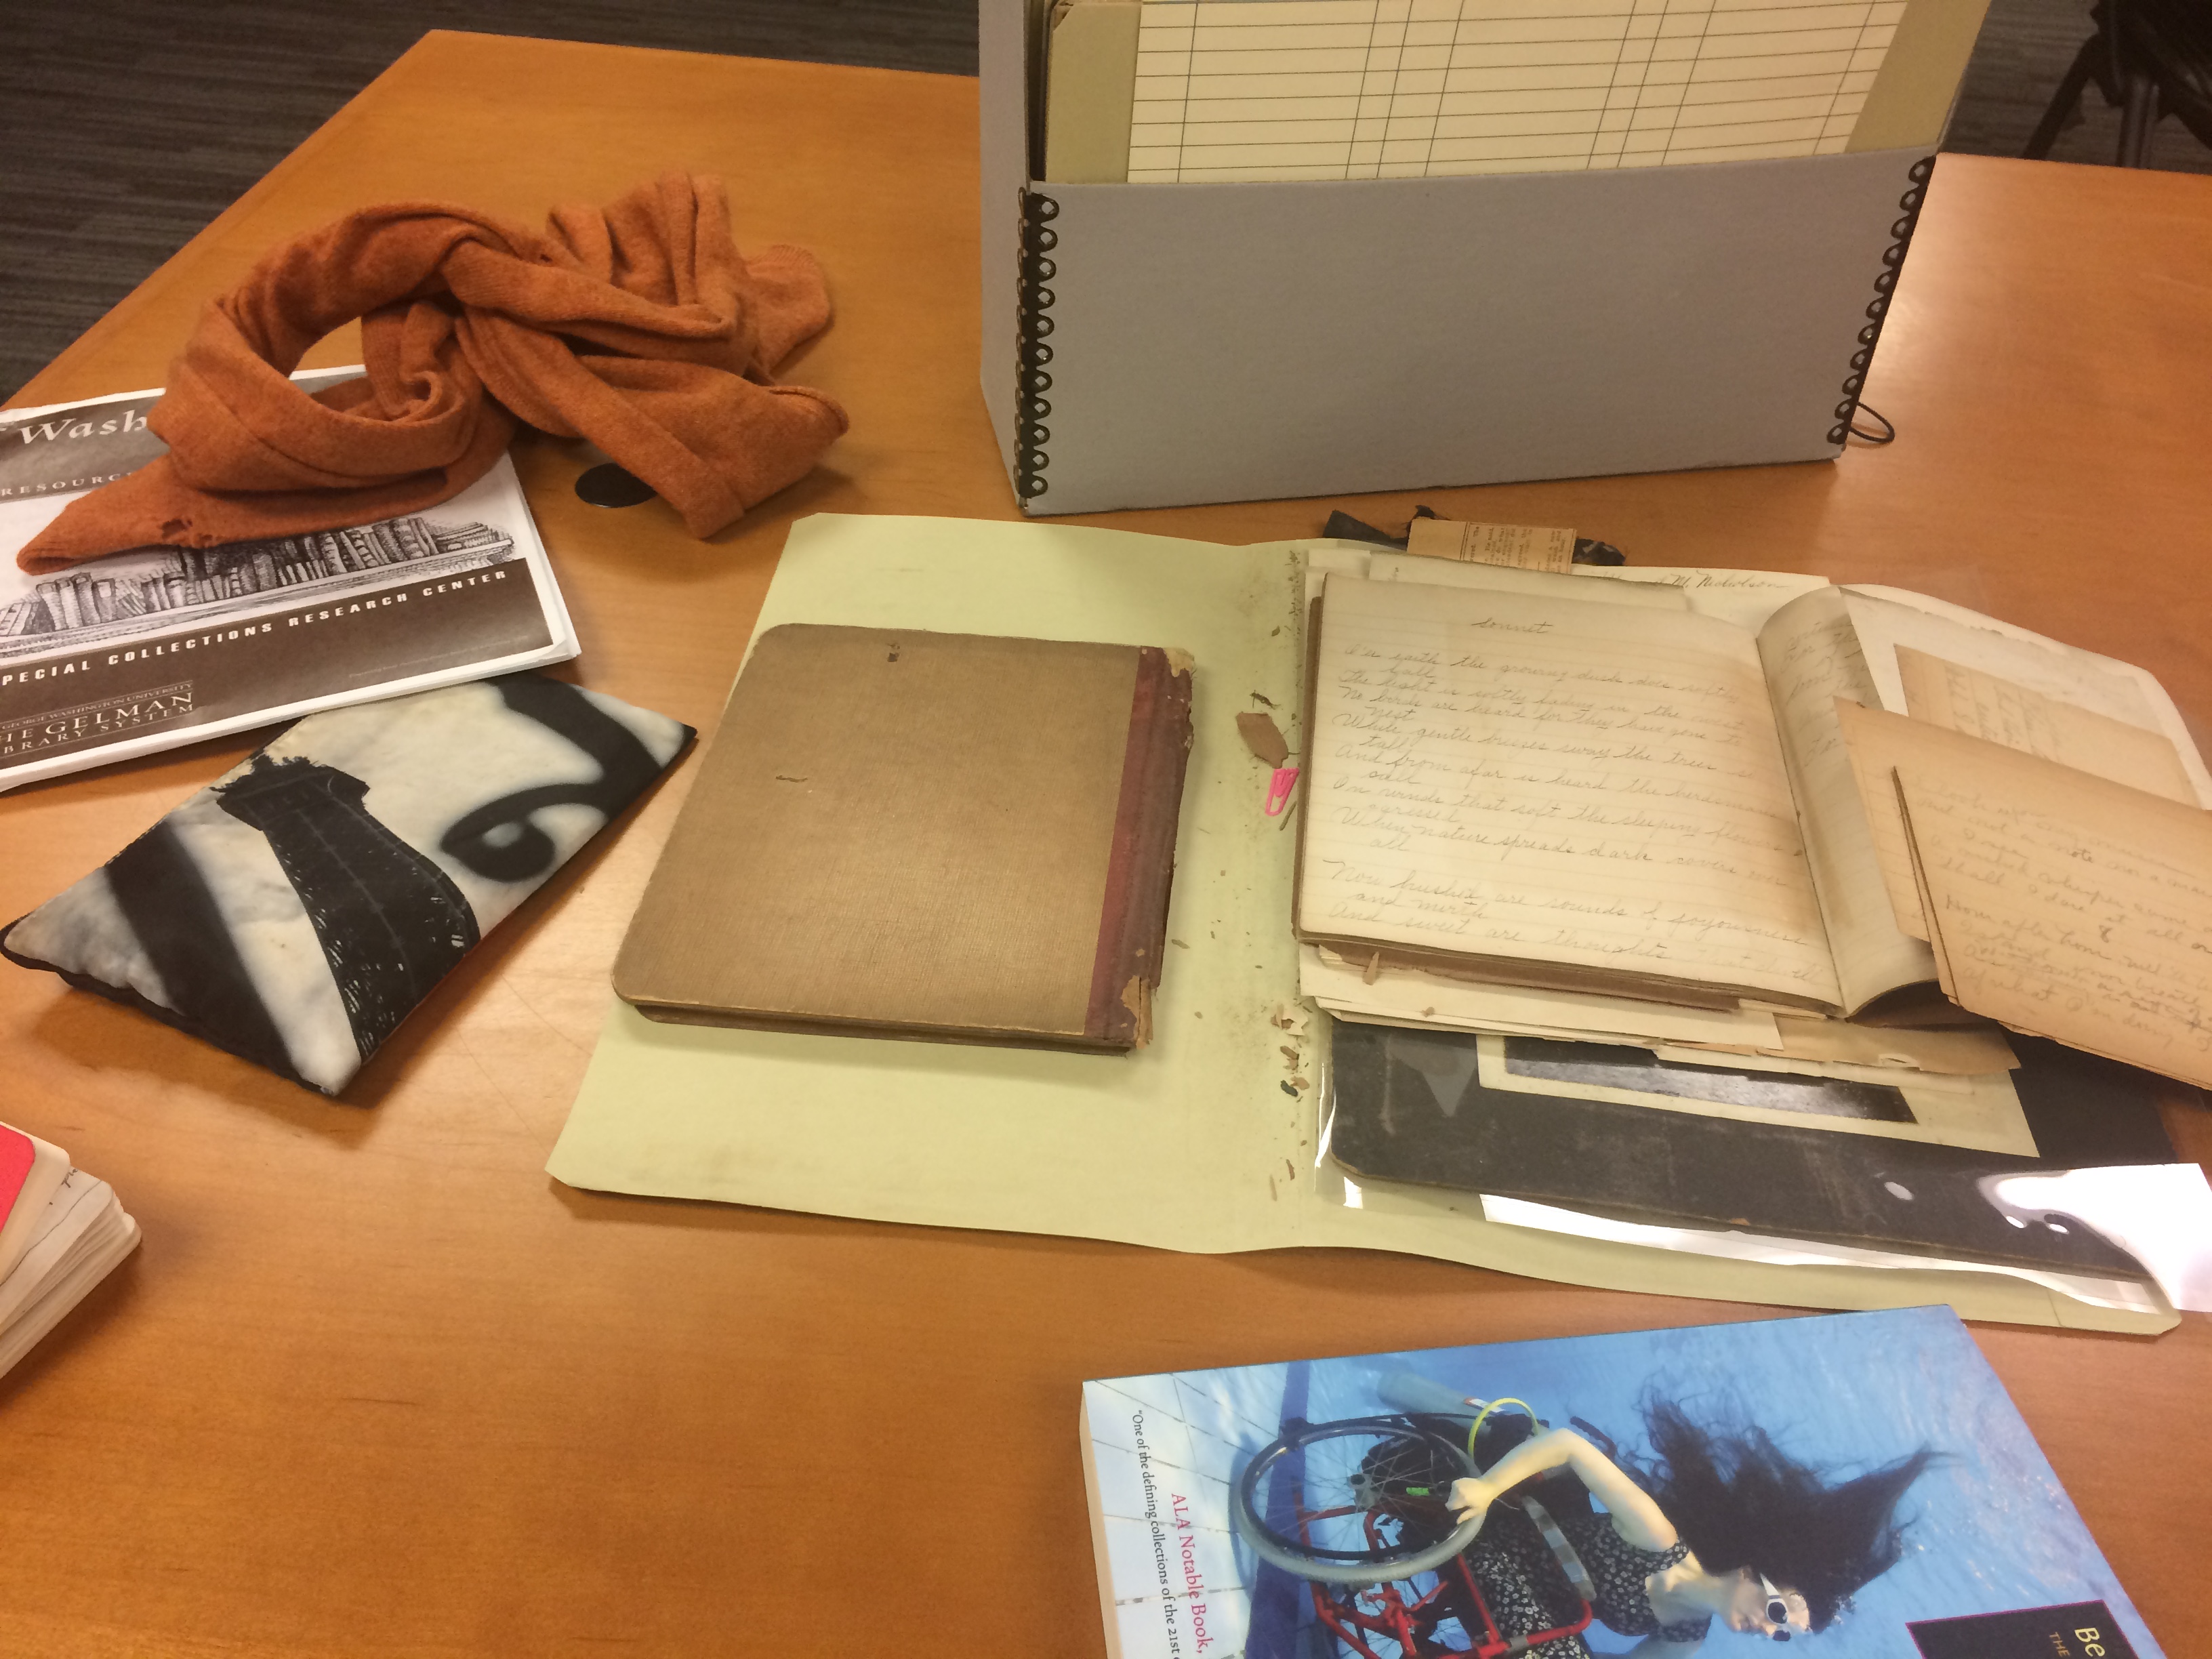 table covered with various items (papers, folder, and scarf)